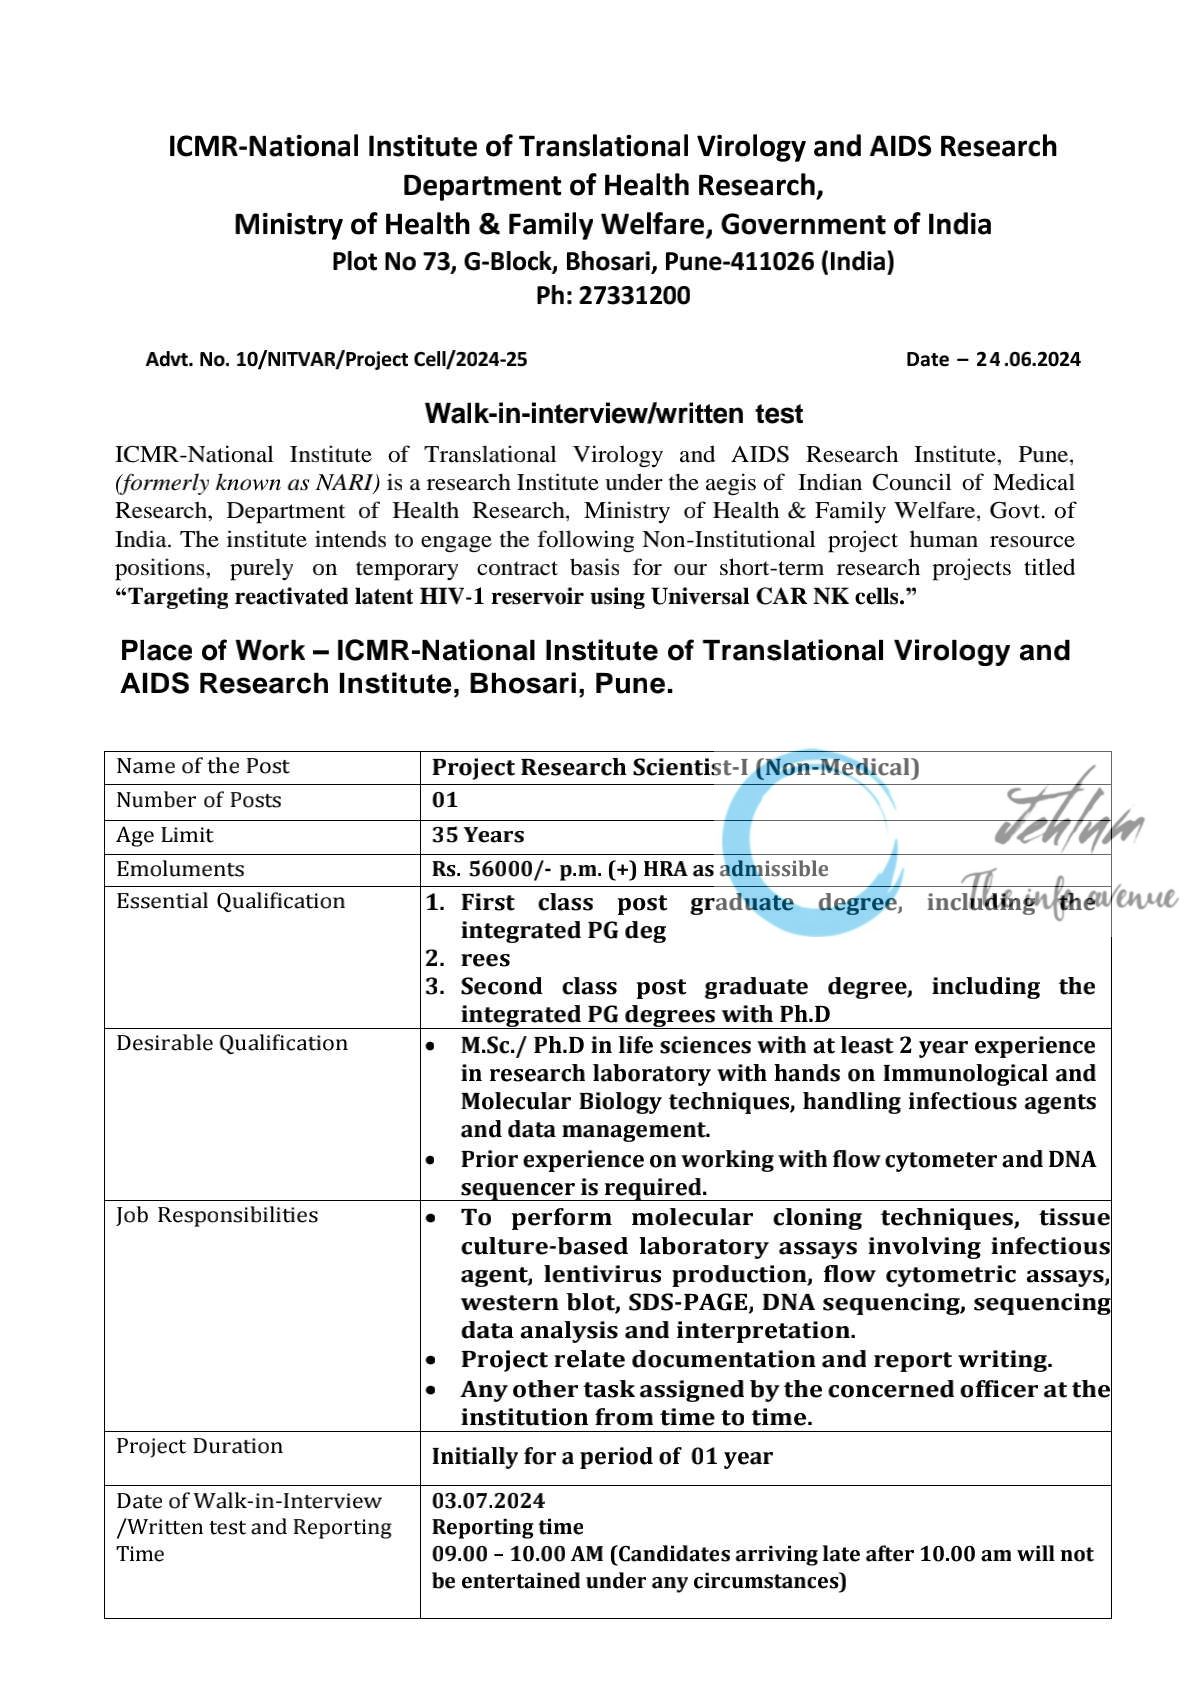 ICMR-National Institute of Translational Virology and AIDS Research Institute Project Research Scientist-I Advertisement Notice 2024